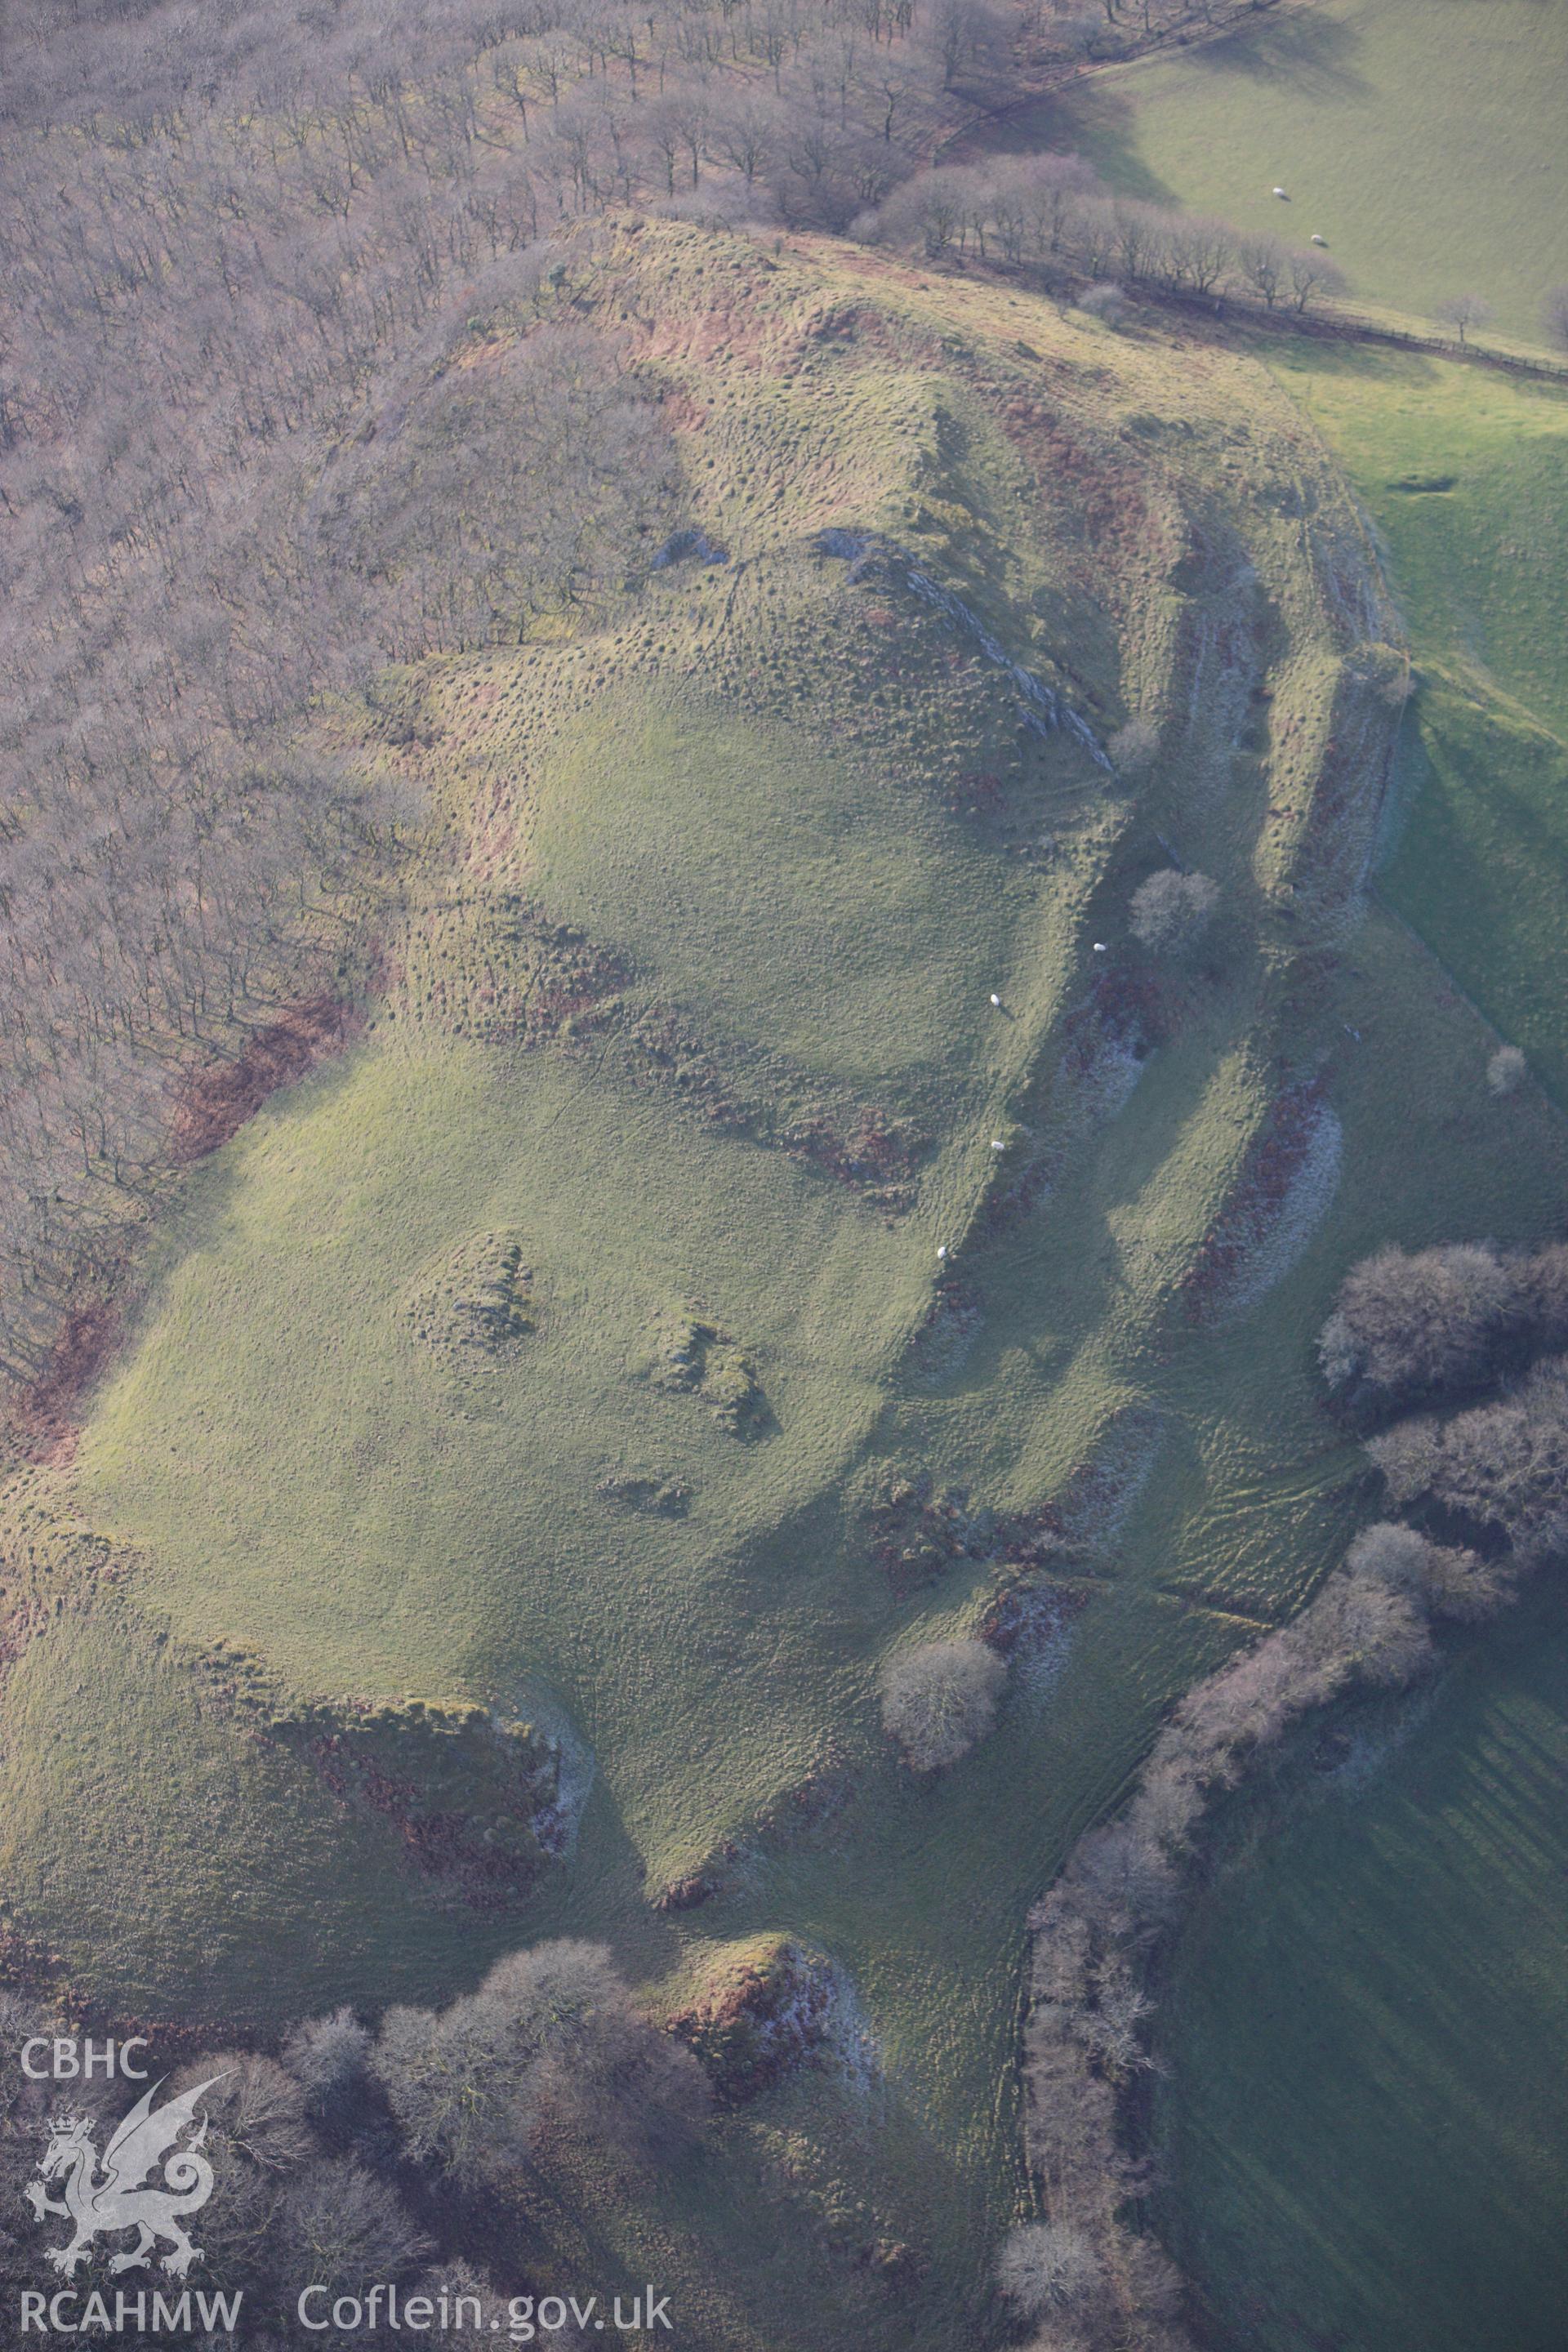 RCAHMW colour oblique photograph of Castell Grogwynion. Taken by Toby Driver on 07/02/2012.